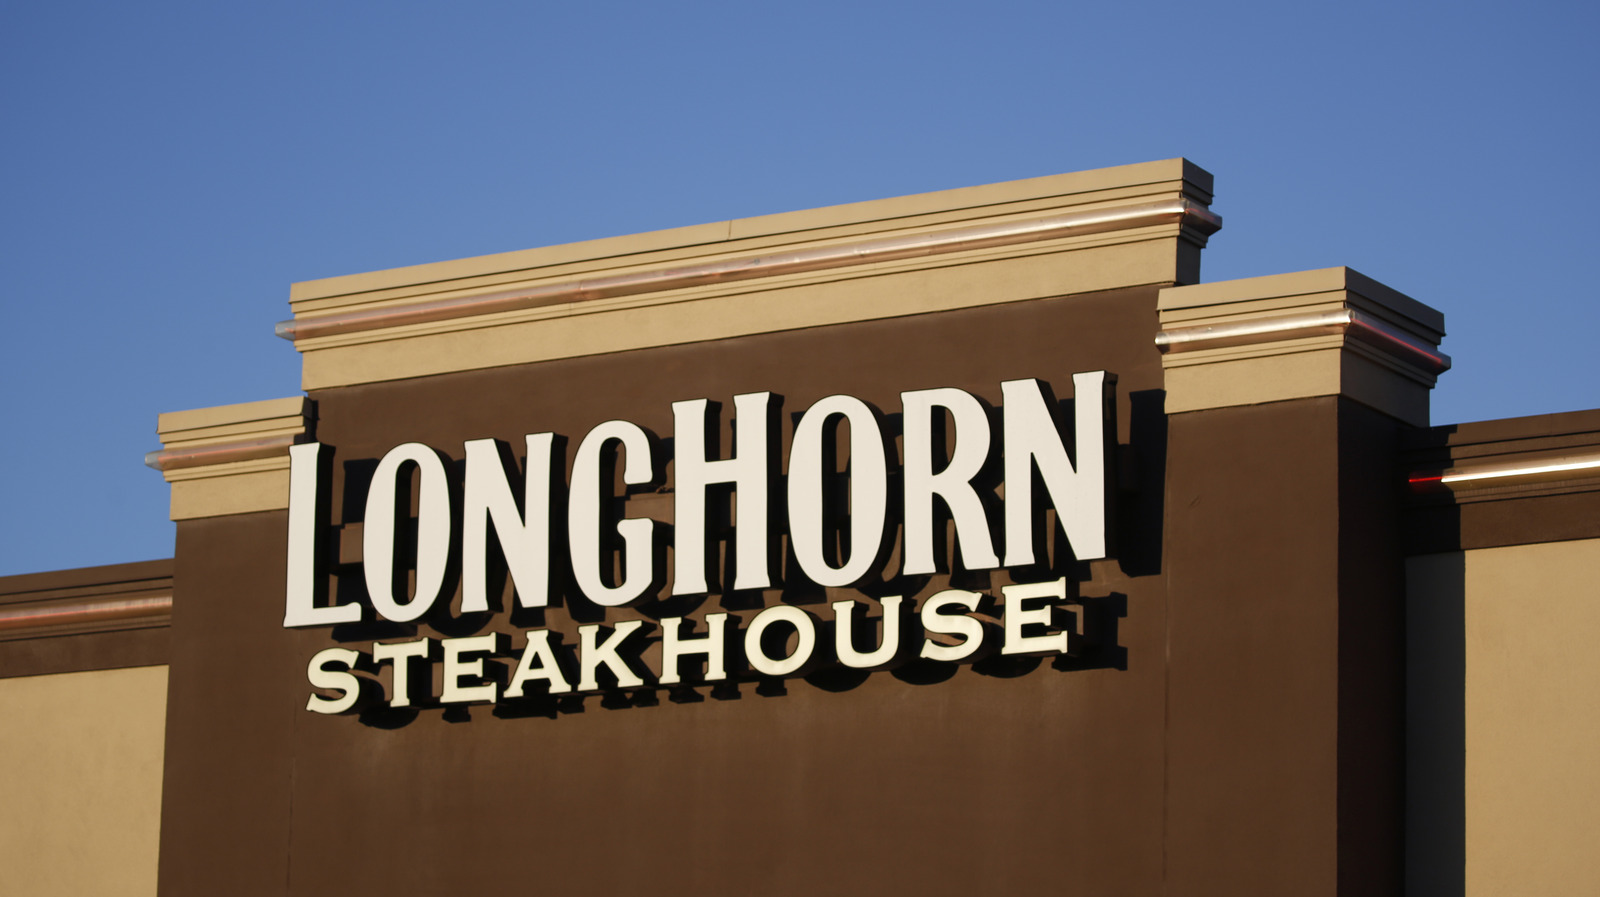 https://www.mashed.com/img/gallery/popular-longhorn-menu-items-ranked-worst-to-best/l-intro-1625065844.jpg